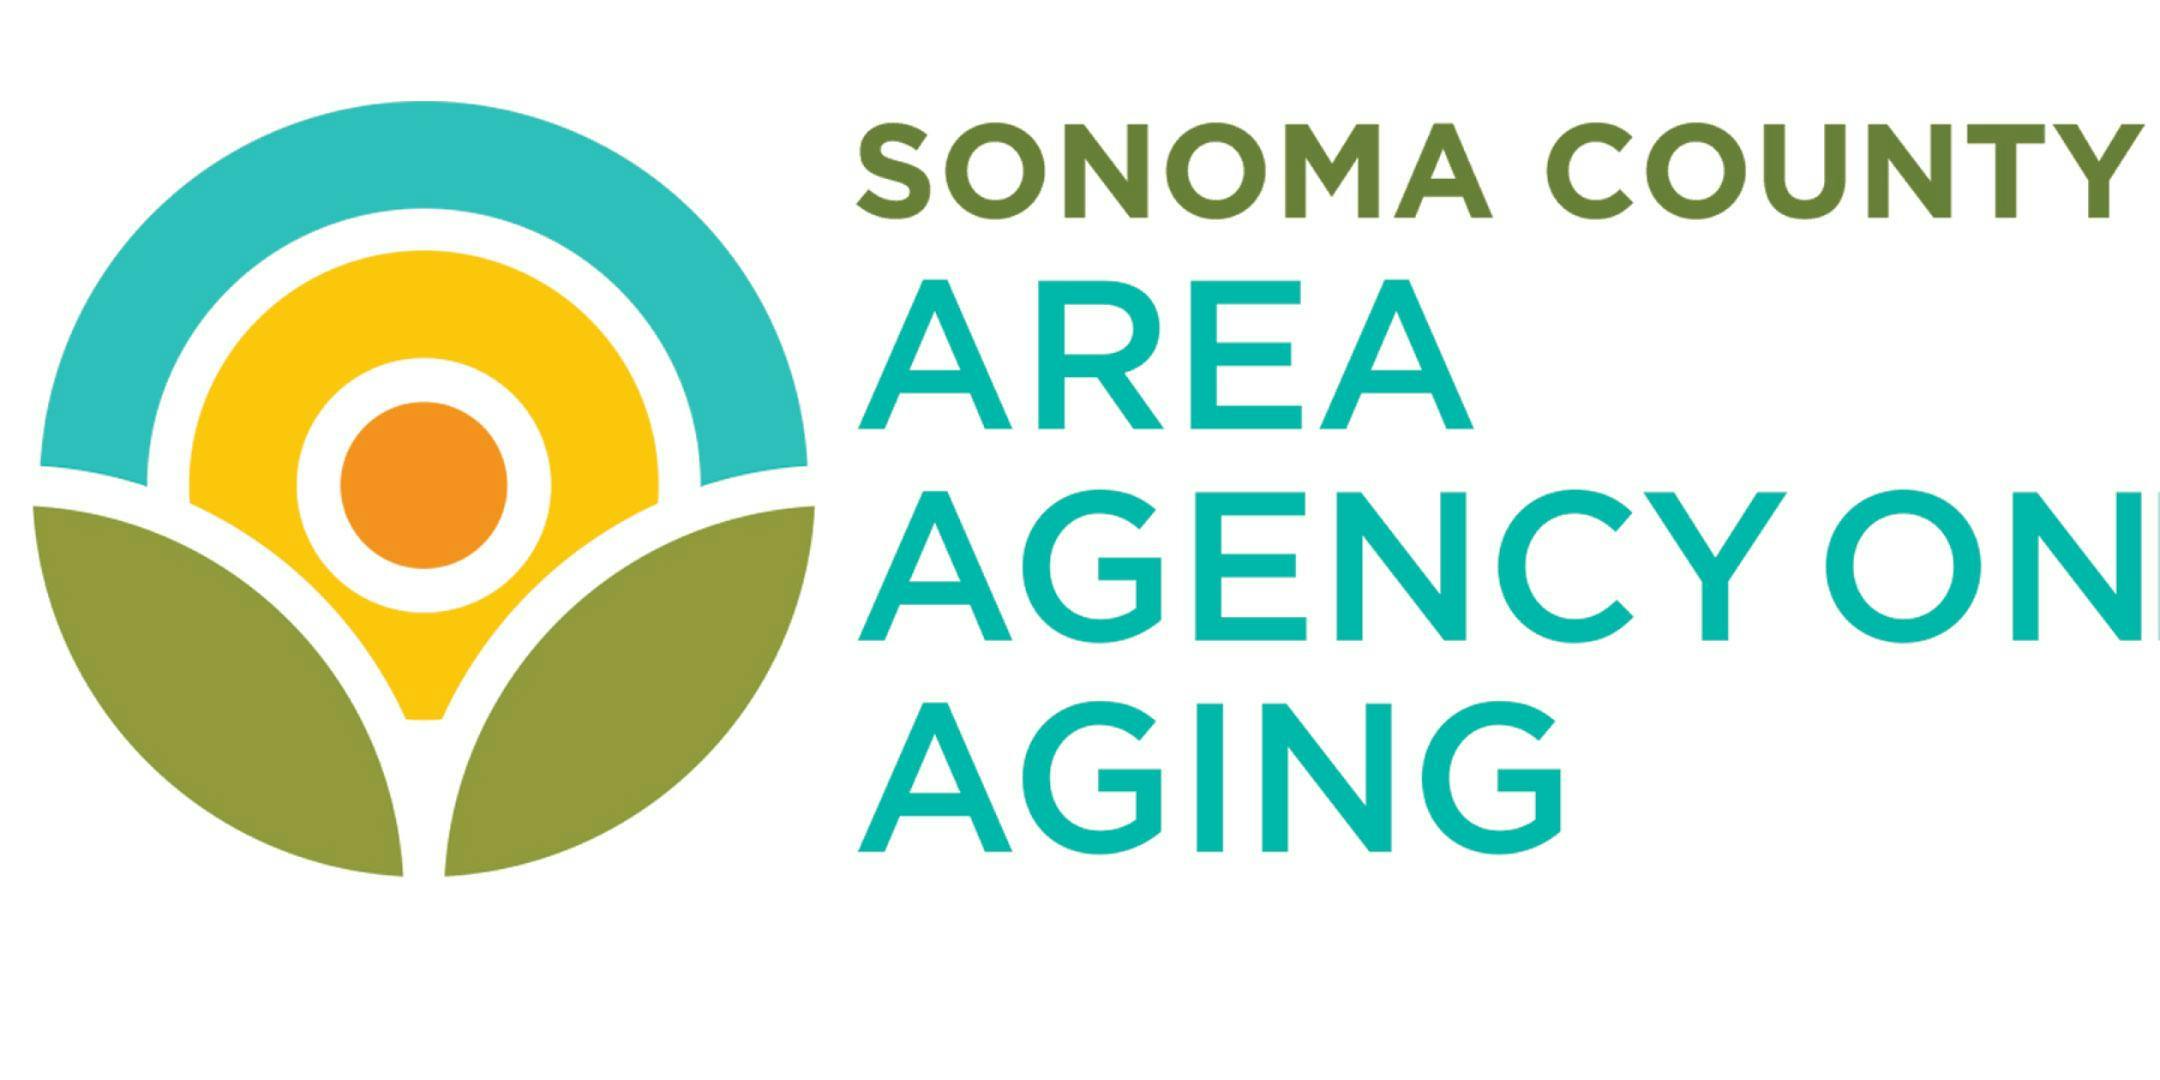 Sonoma County Residents, We Want to Hear From You! Focus Groups